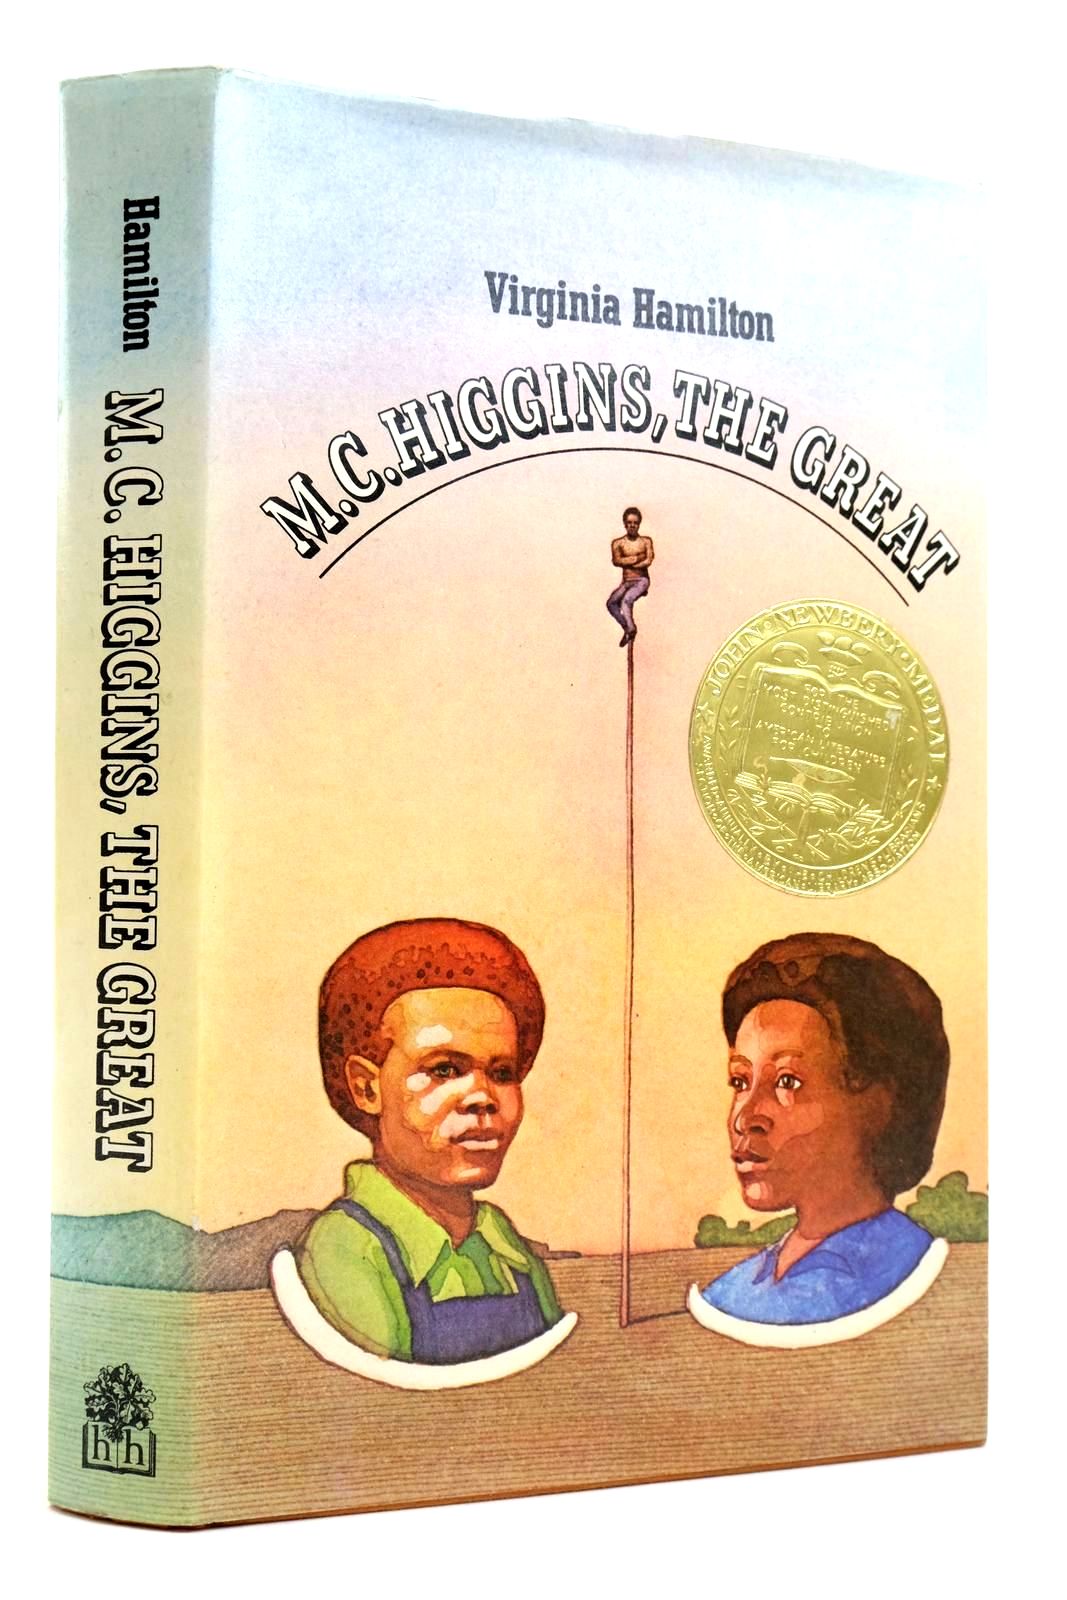 Photo of M.C. HIGGINS, THE GREAT written by Hamilton, Virginia published by Hamish Hamilton Childrens Books (STOCK CODE: 2135486)  for sale by Stella & Rose's Books